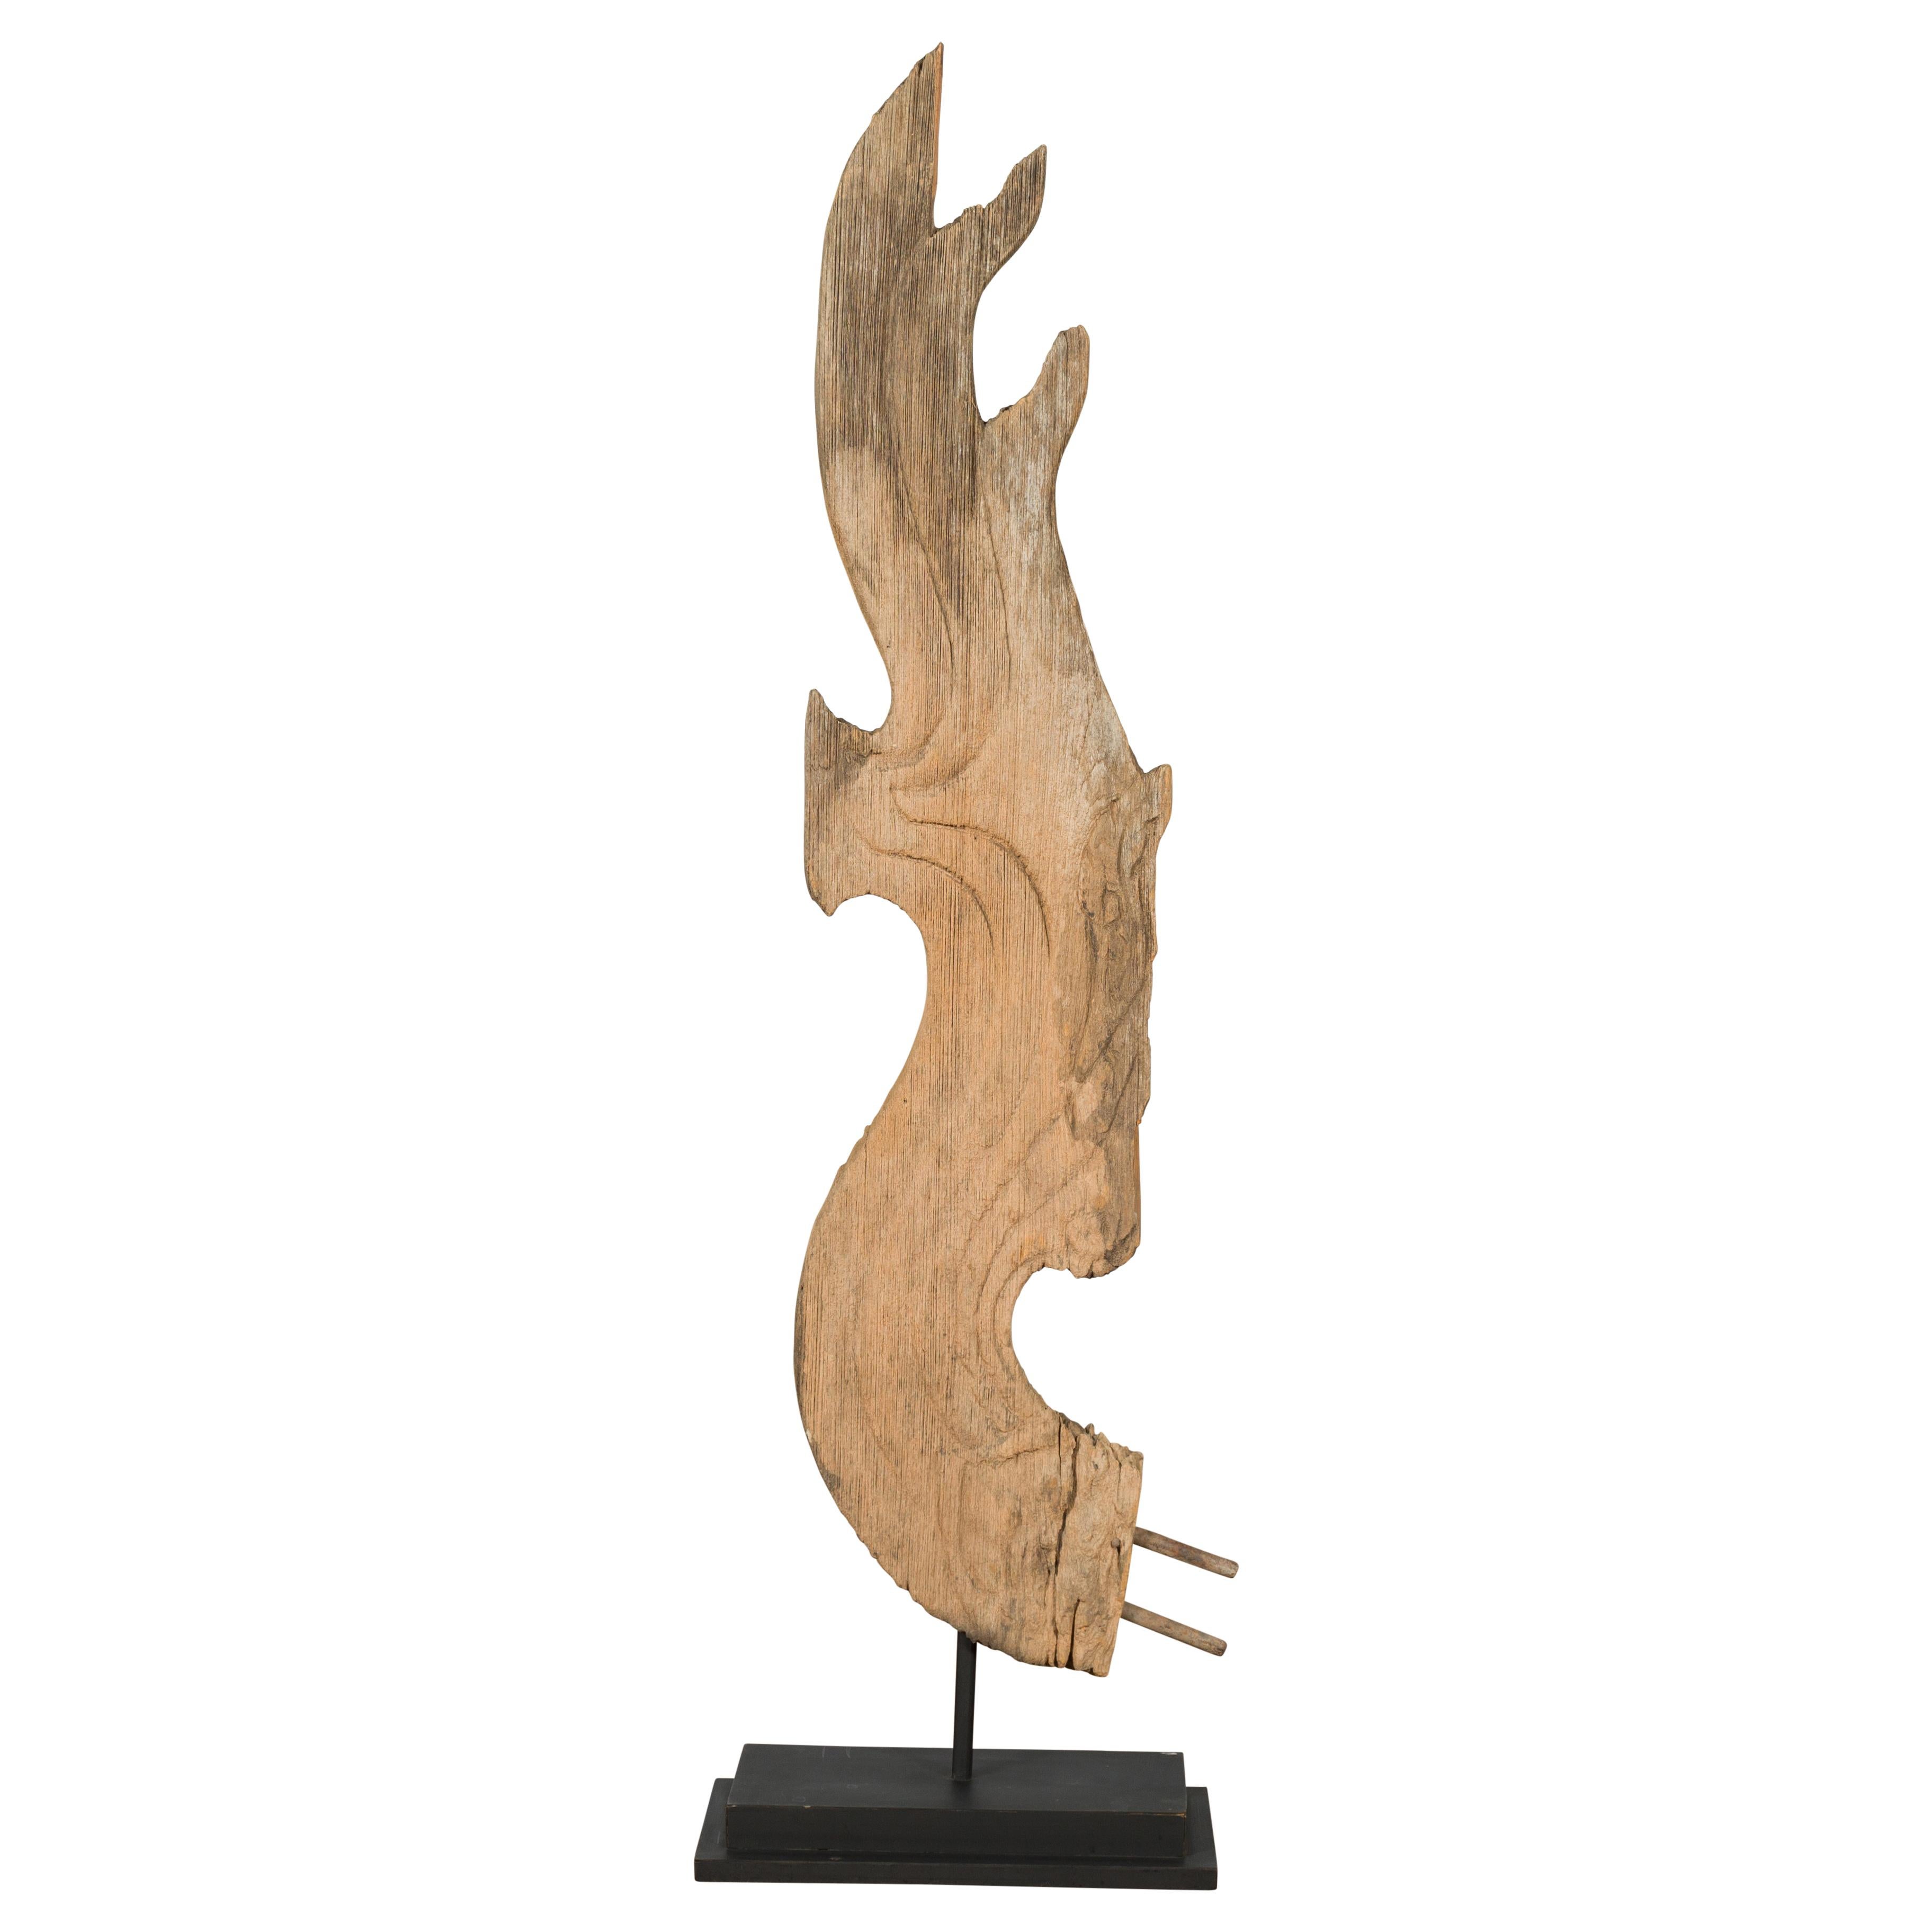 A Thai carved wooden temple dragon sculpture from the 19th century, mounted on a custom base. Created in Thailand, this abstracted wooden dragon sculpture adopts a curved shape evoking both wings and flames. The front features subtle incised lines